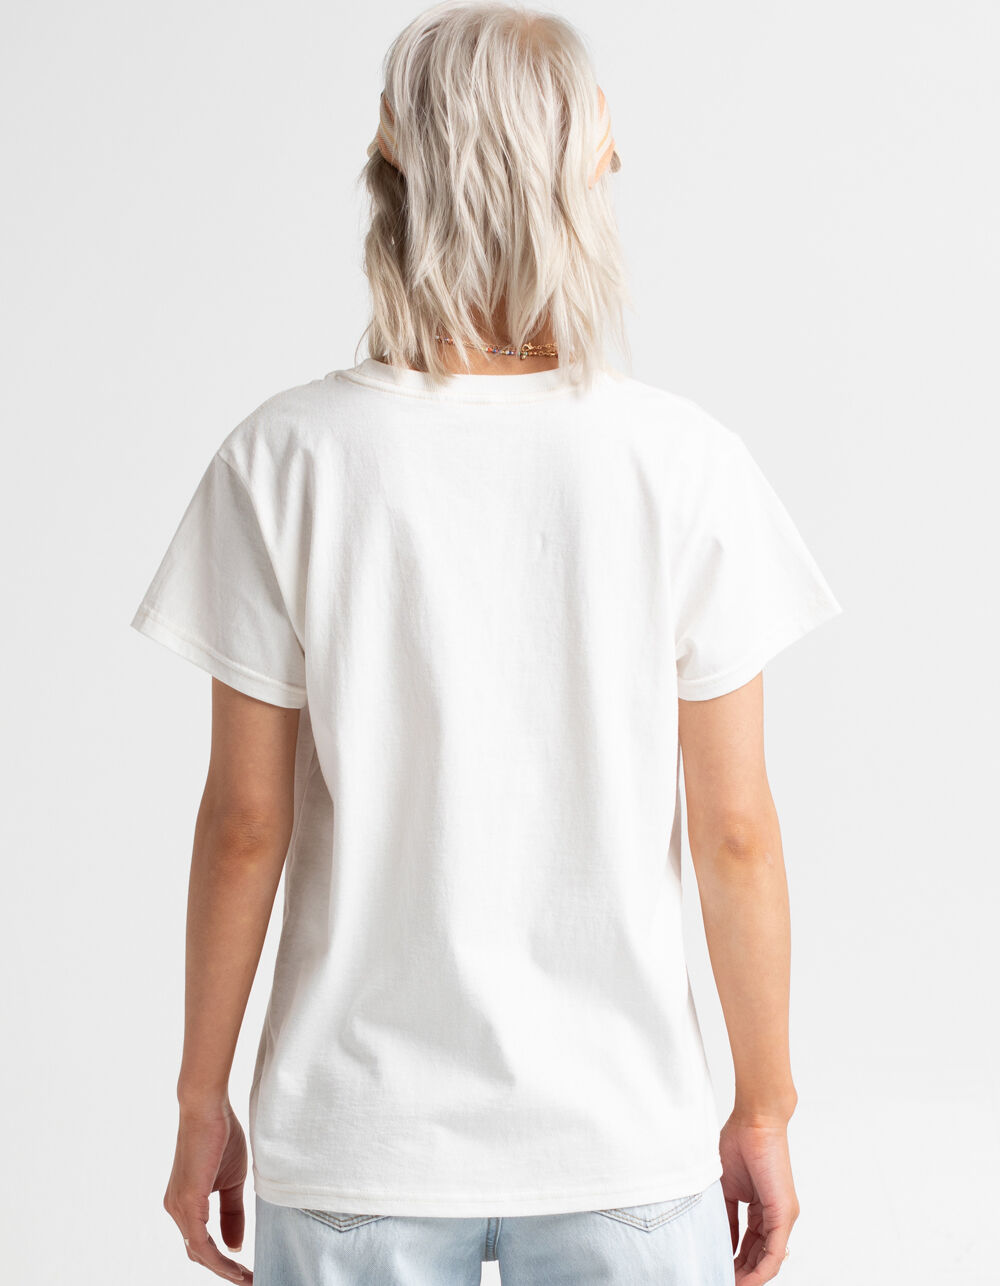 ROXY All The Good Vibes Womens Oversized Tee - OFF WHITE | Tillys